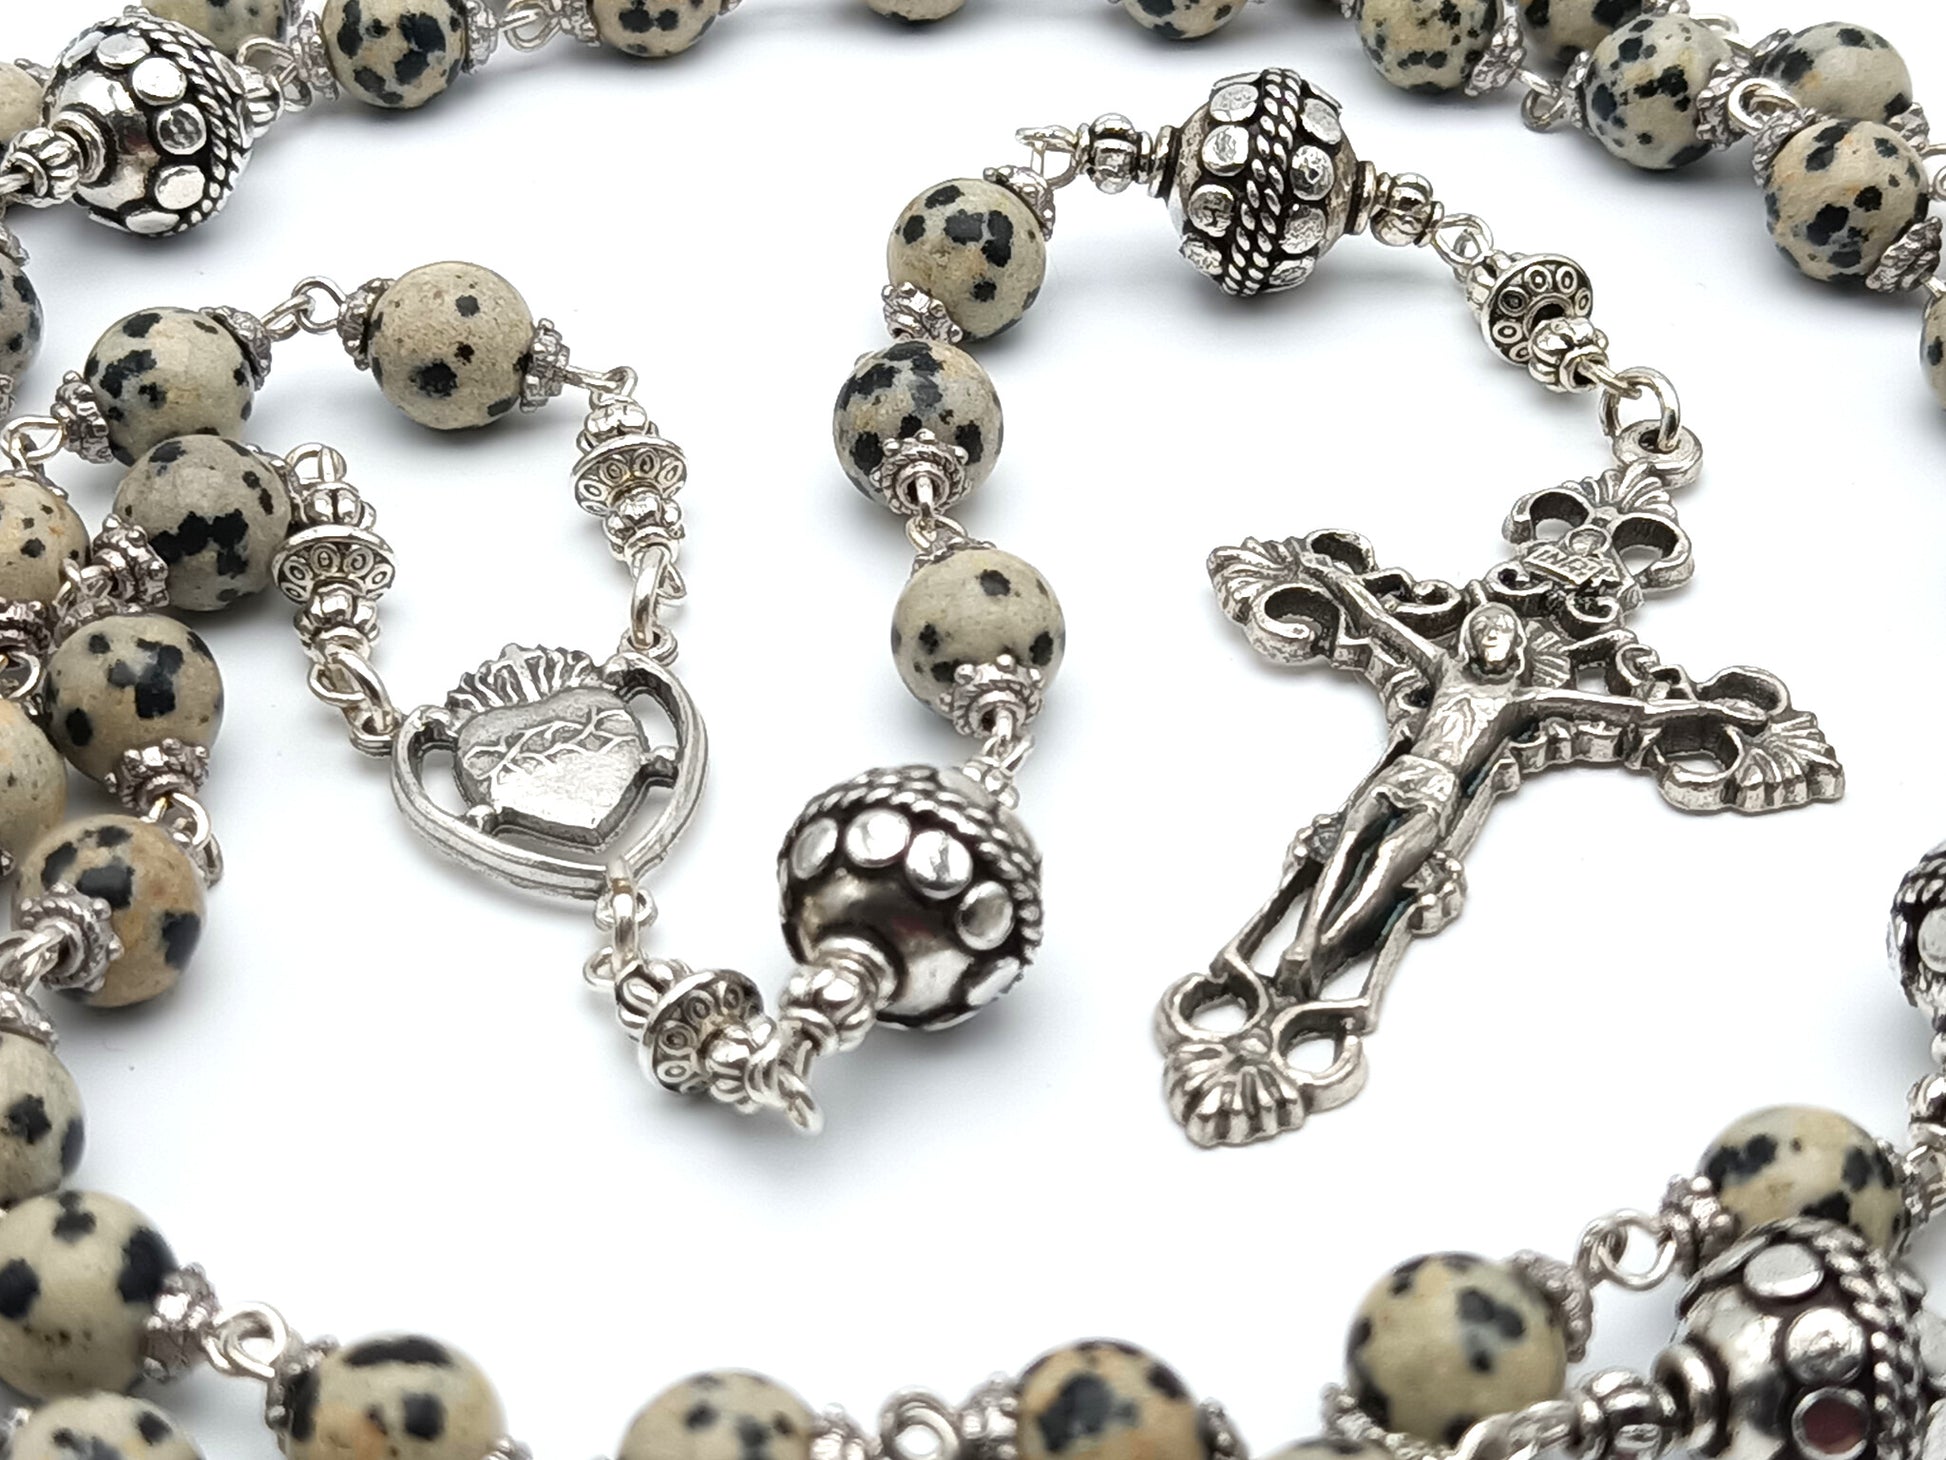 Sacred Heart of Jesus unique rosary beads with gemstone beads, silver crucifix, pater beads and centre medal.